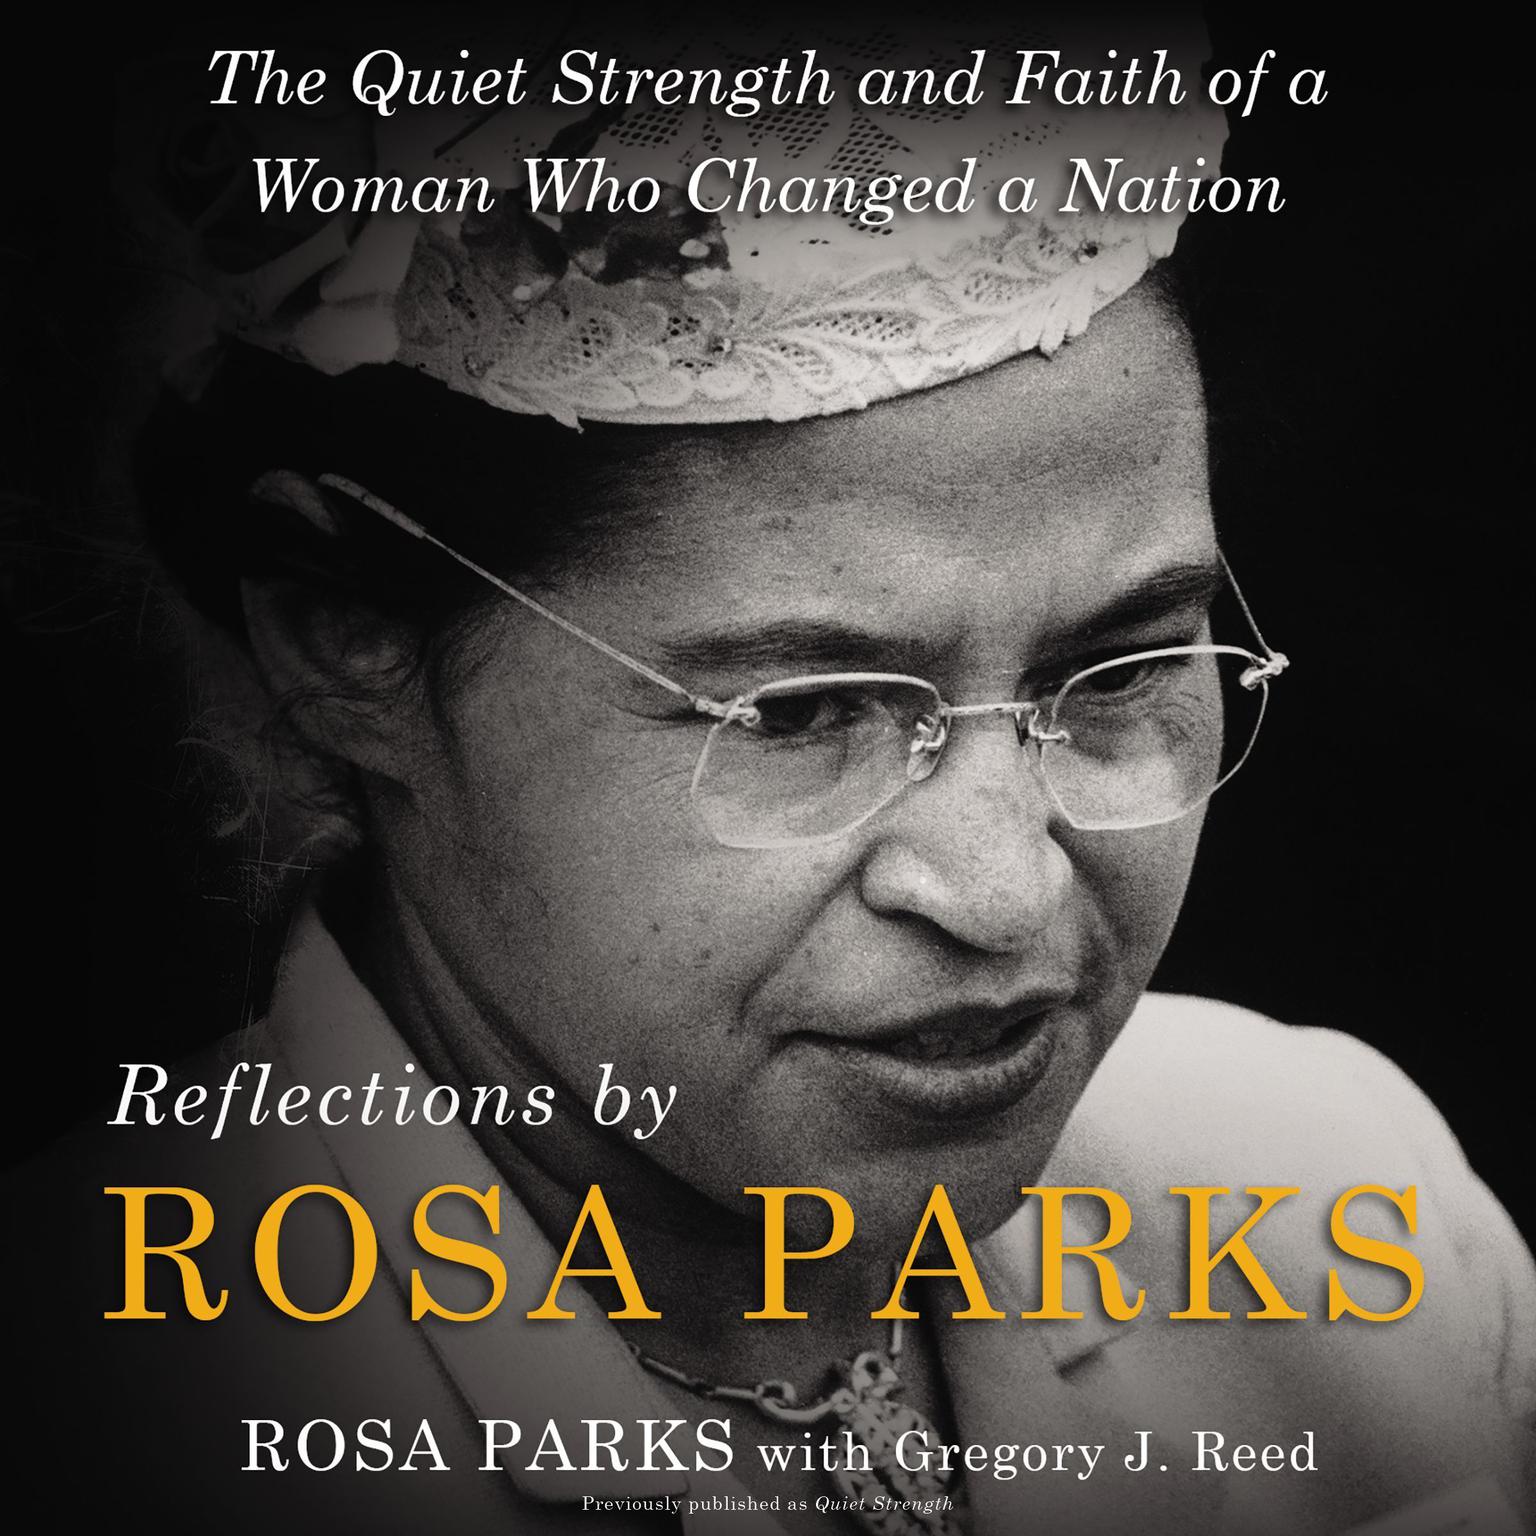 Reflections by Rosa Parks: The Quiet Strength and Faith of a Woman Who Changed a Nation Audiobook, by Rosa Parks